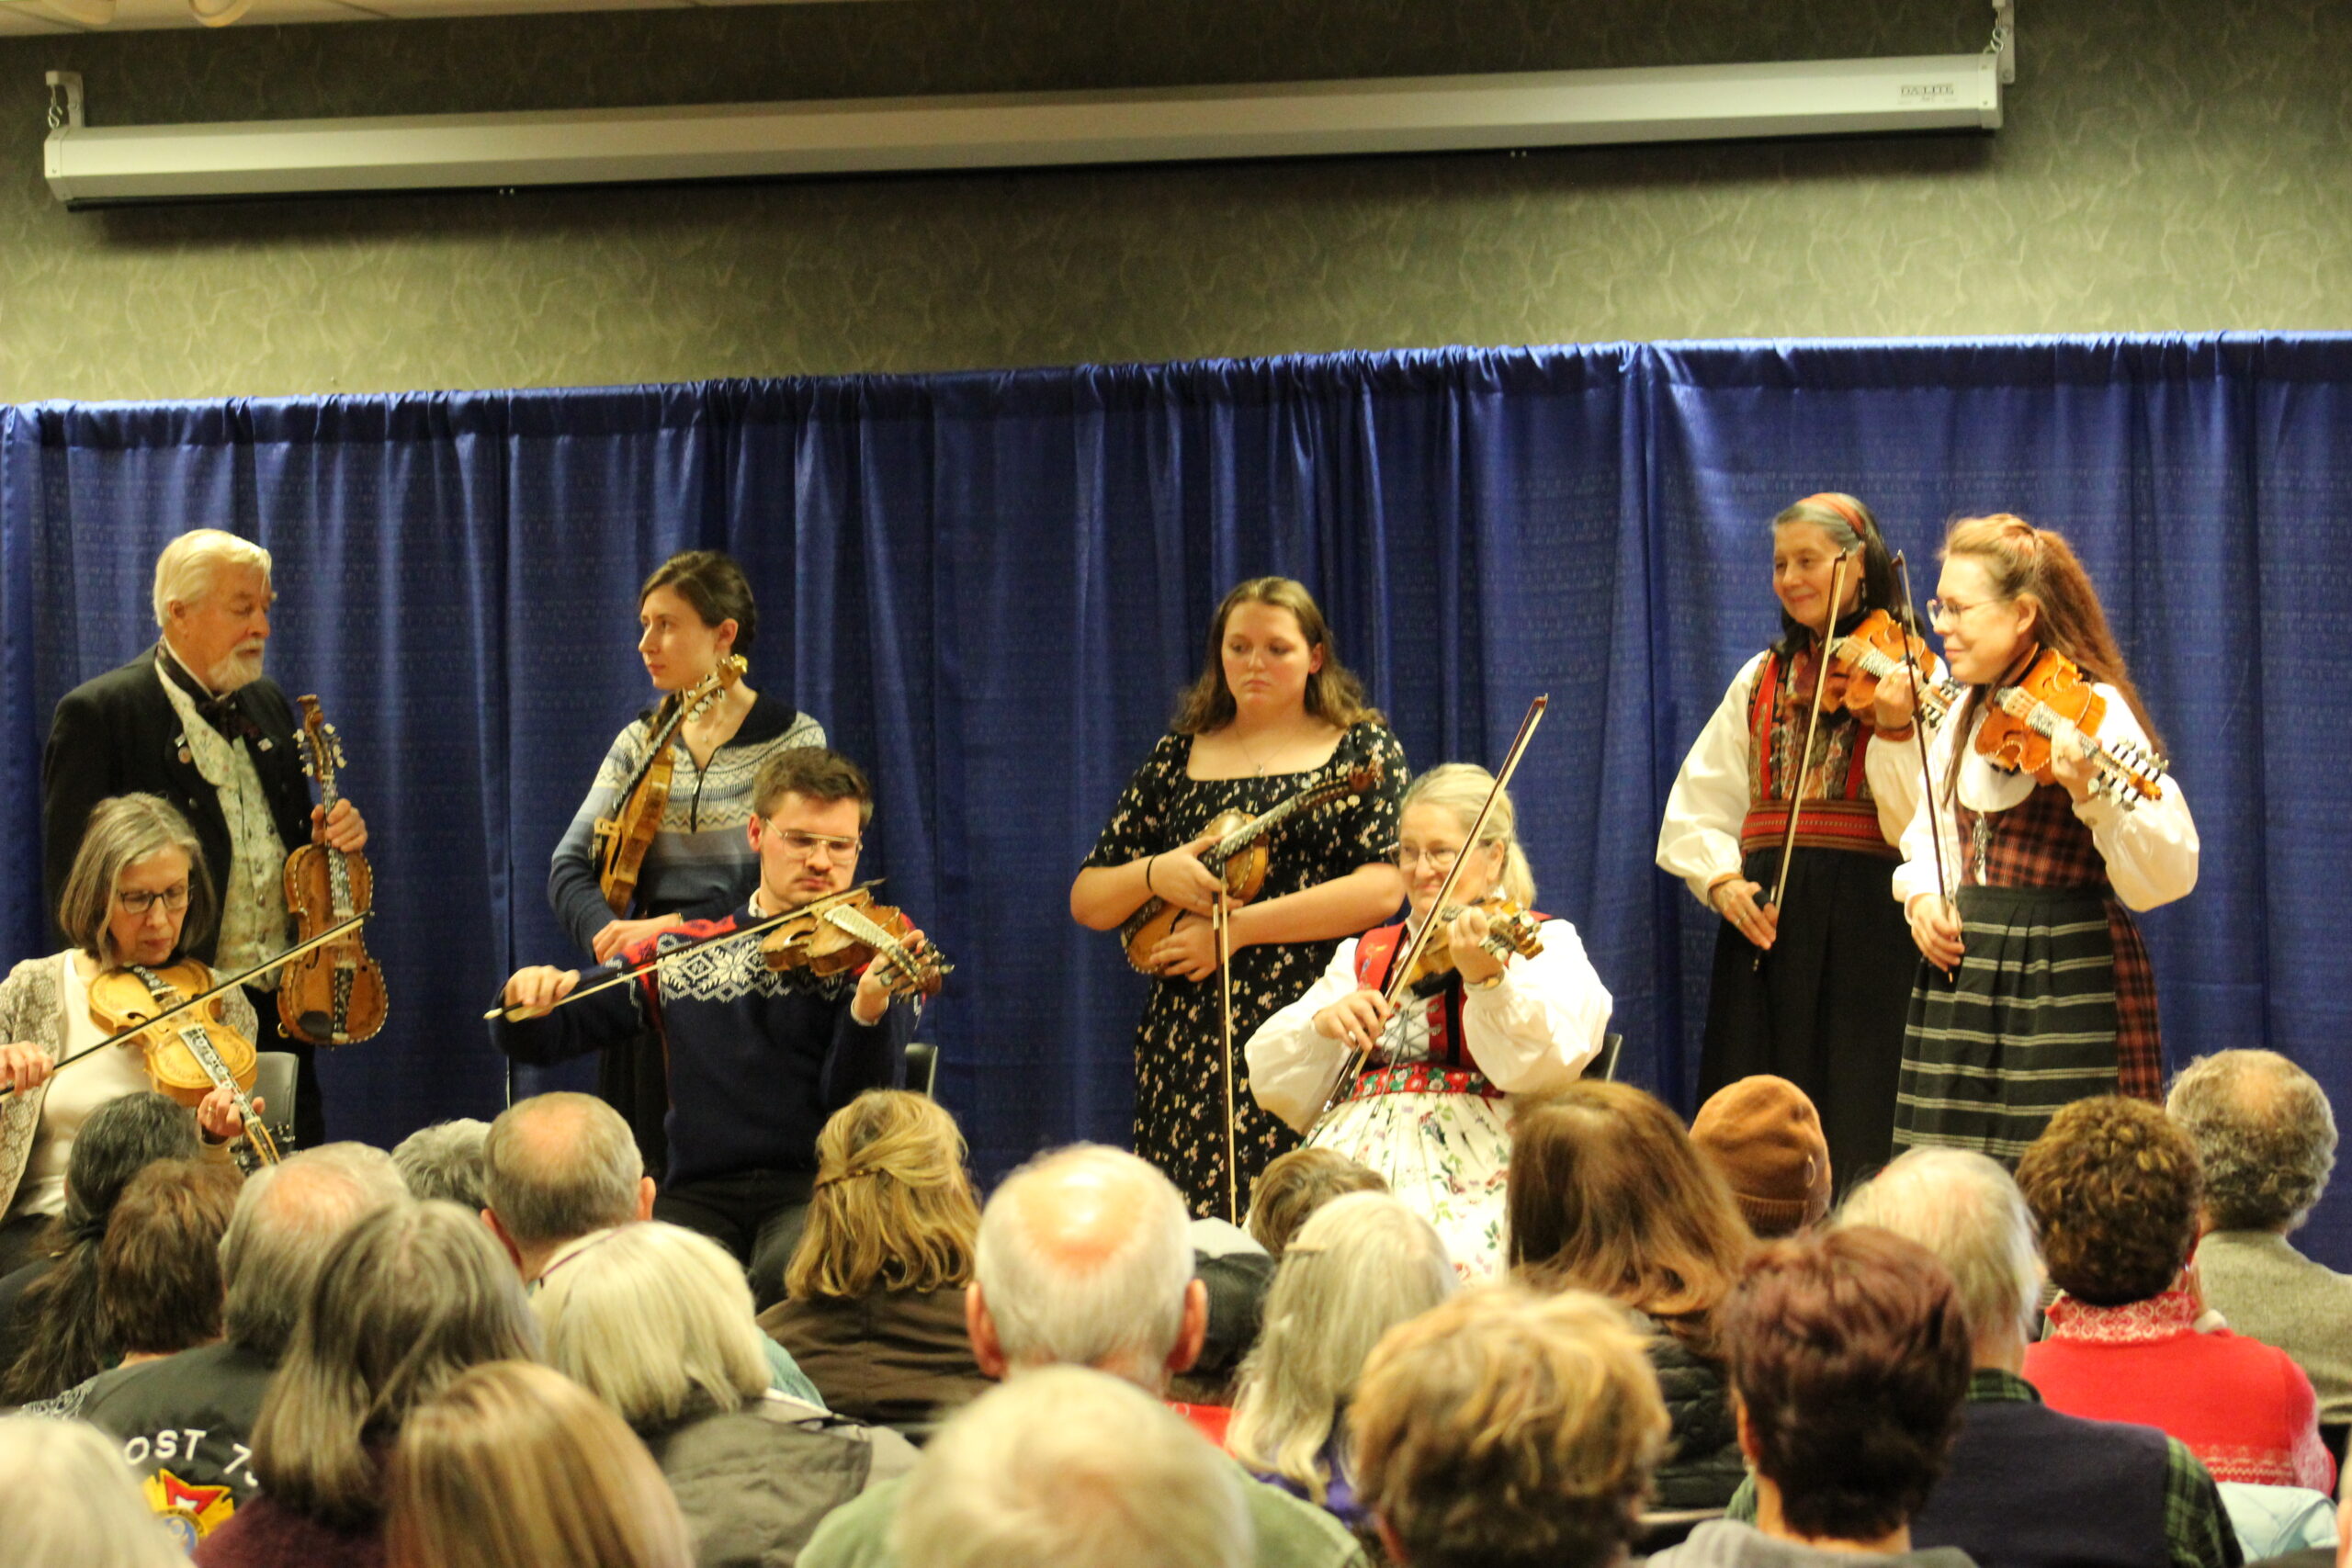 8 people on stage playing intricately decorated fiddles in front of a crowd.